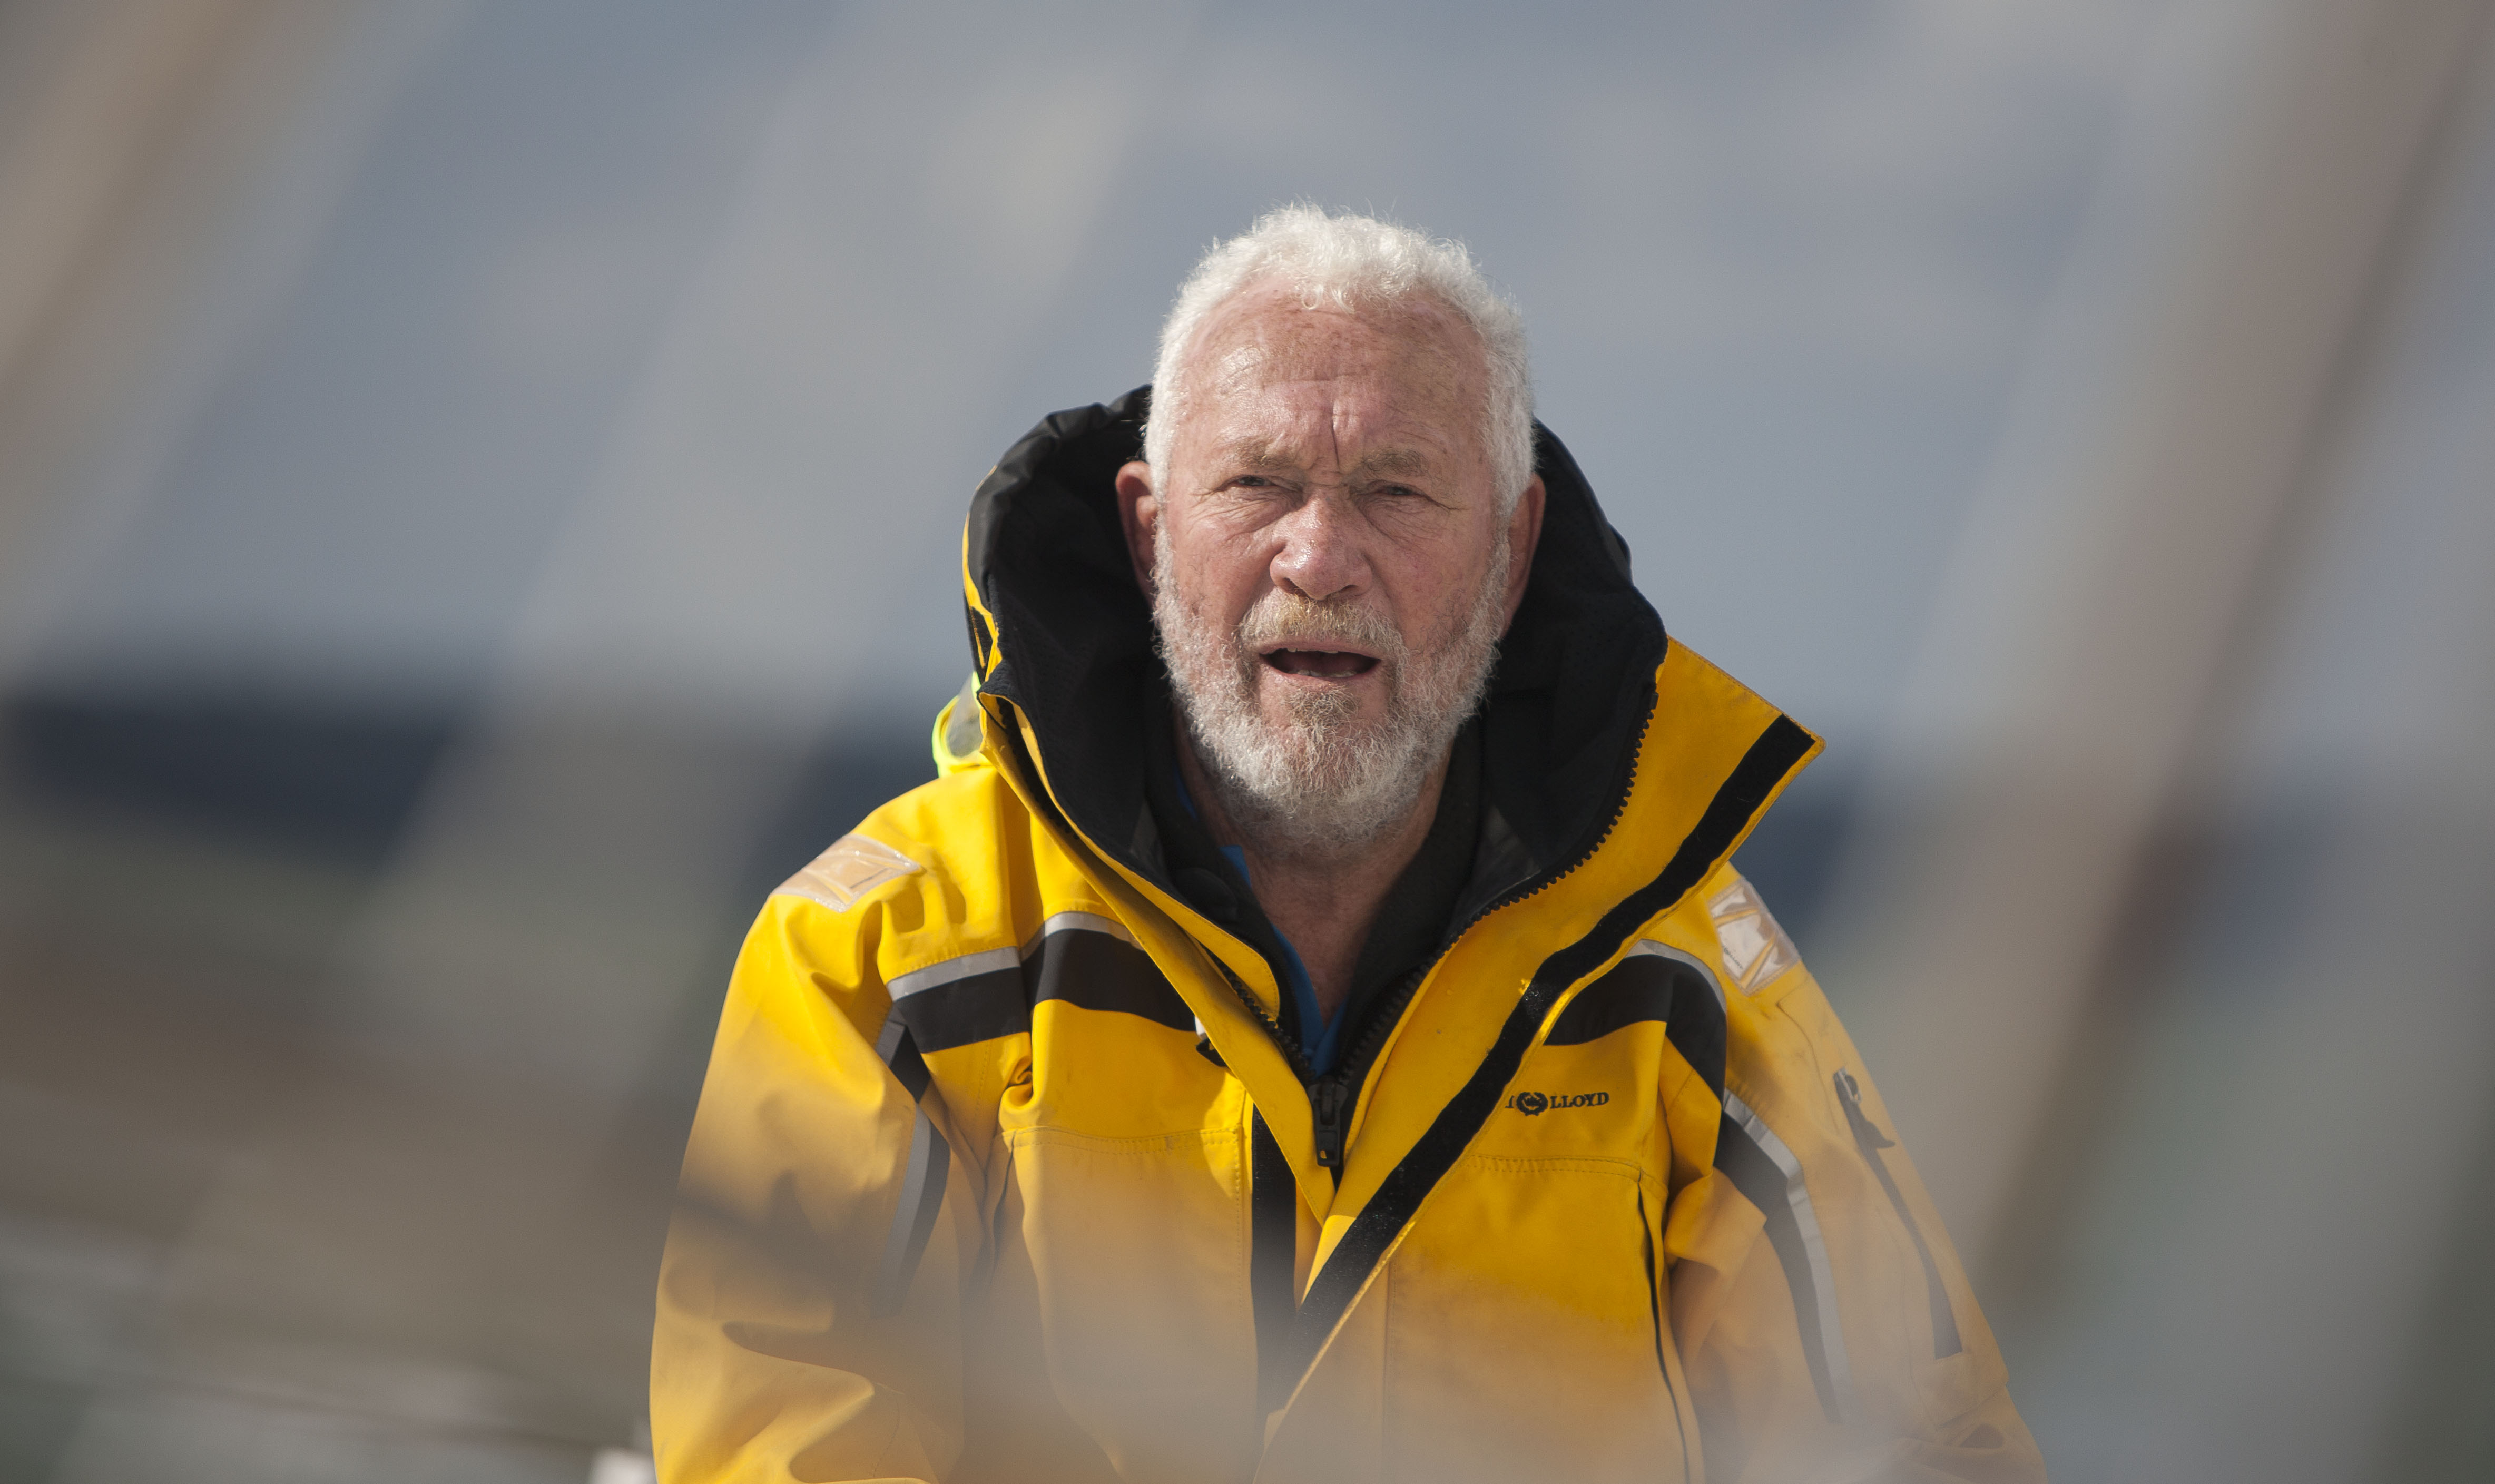 It has been a tiring 24 hours of rain squalls for Sir Robin Knox-Johnston